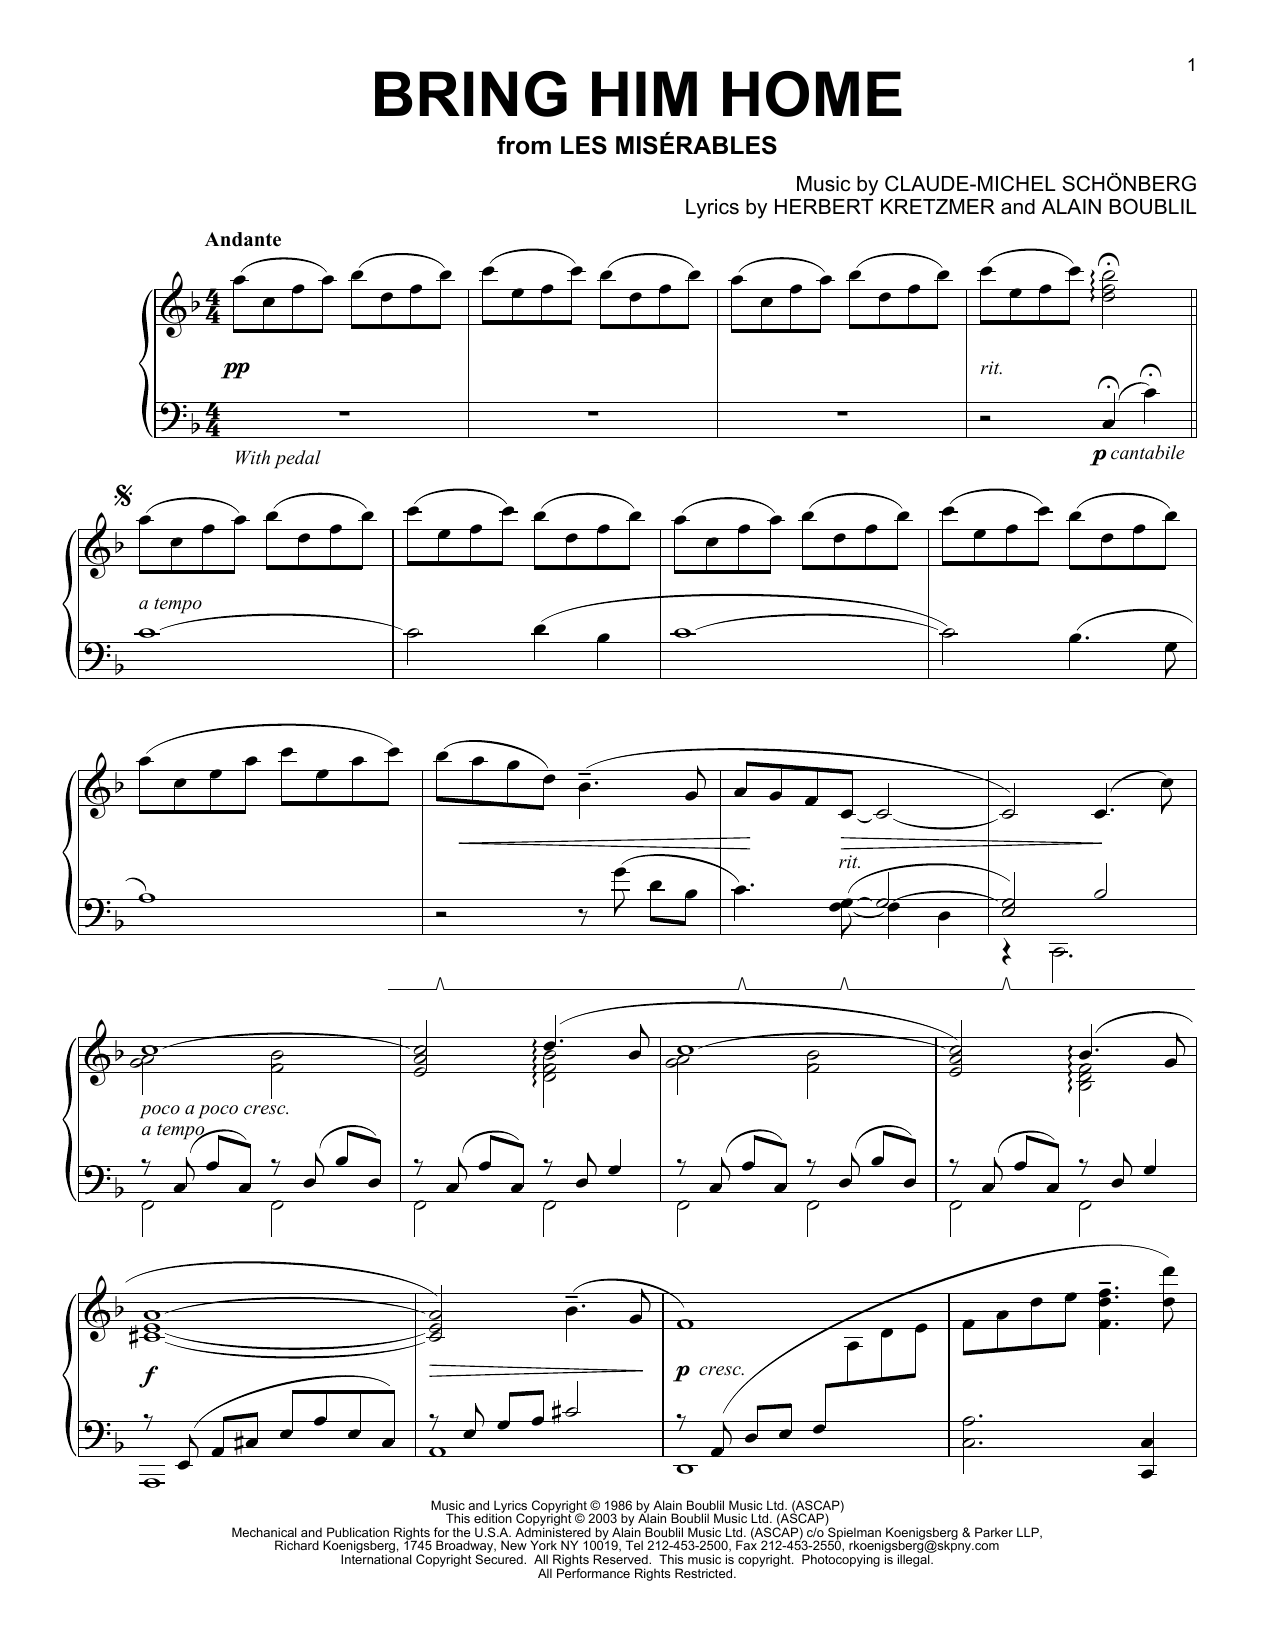 Alain Boublil Bring Him Home sheet music notes and chords. Download Printable PDF.